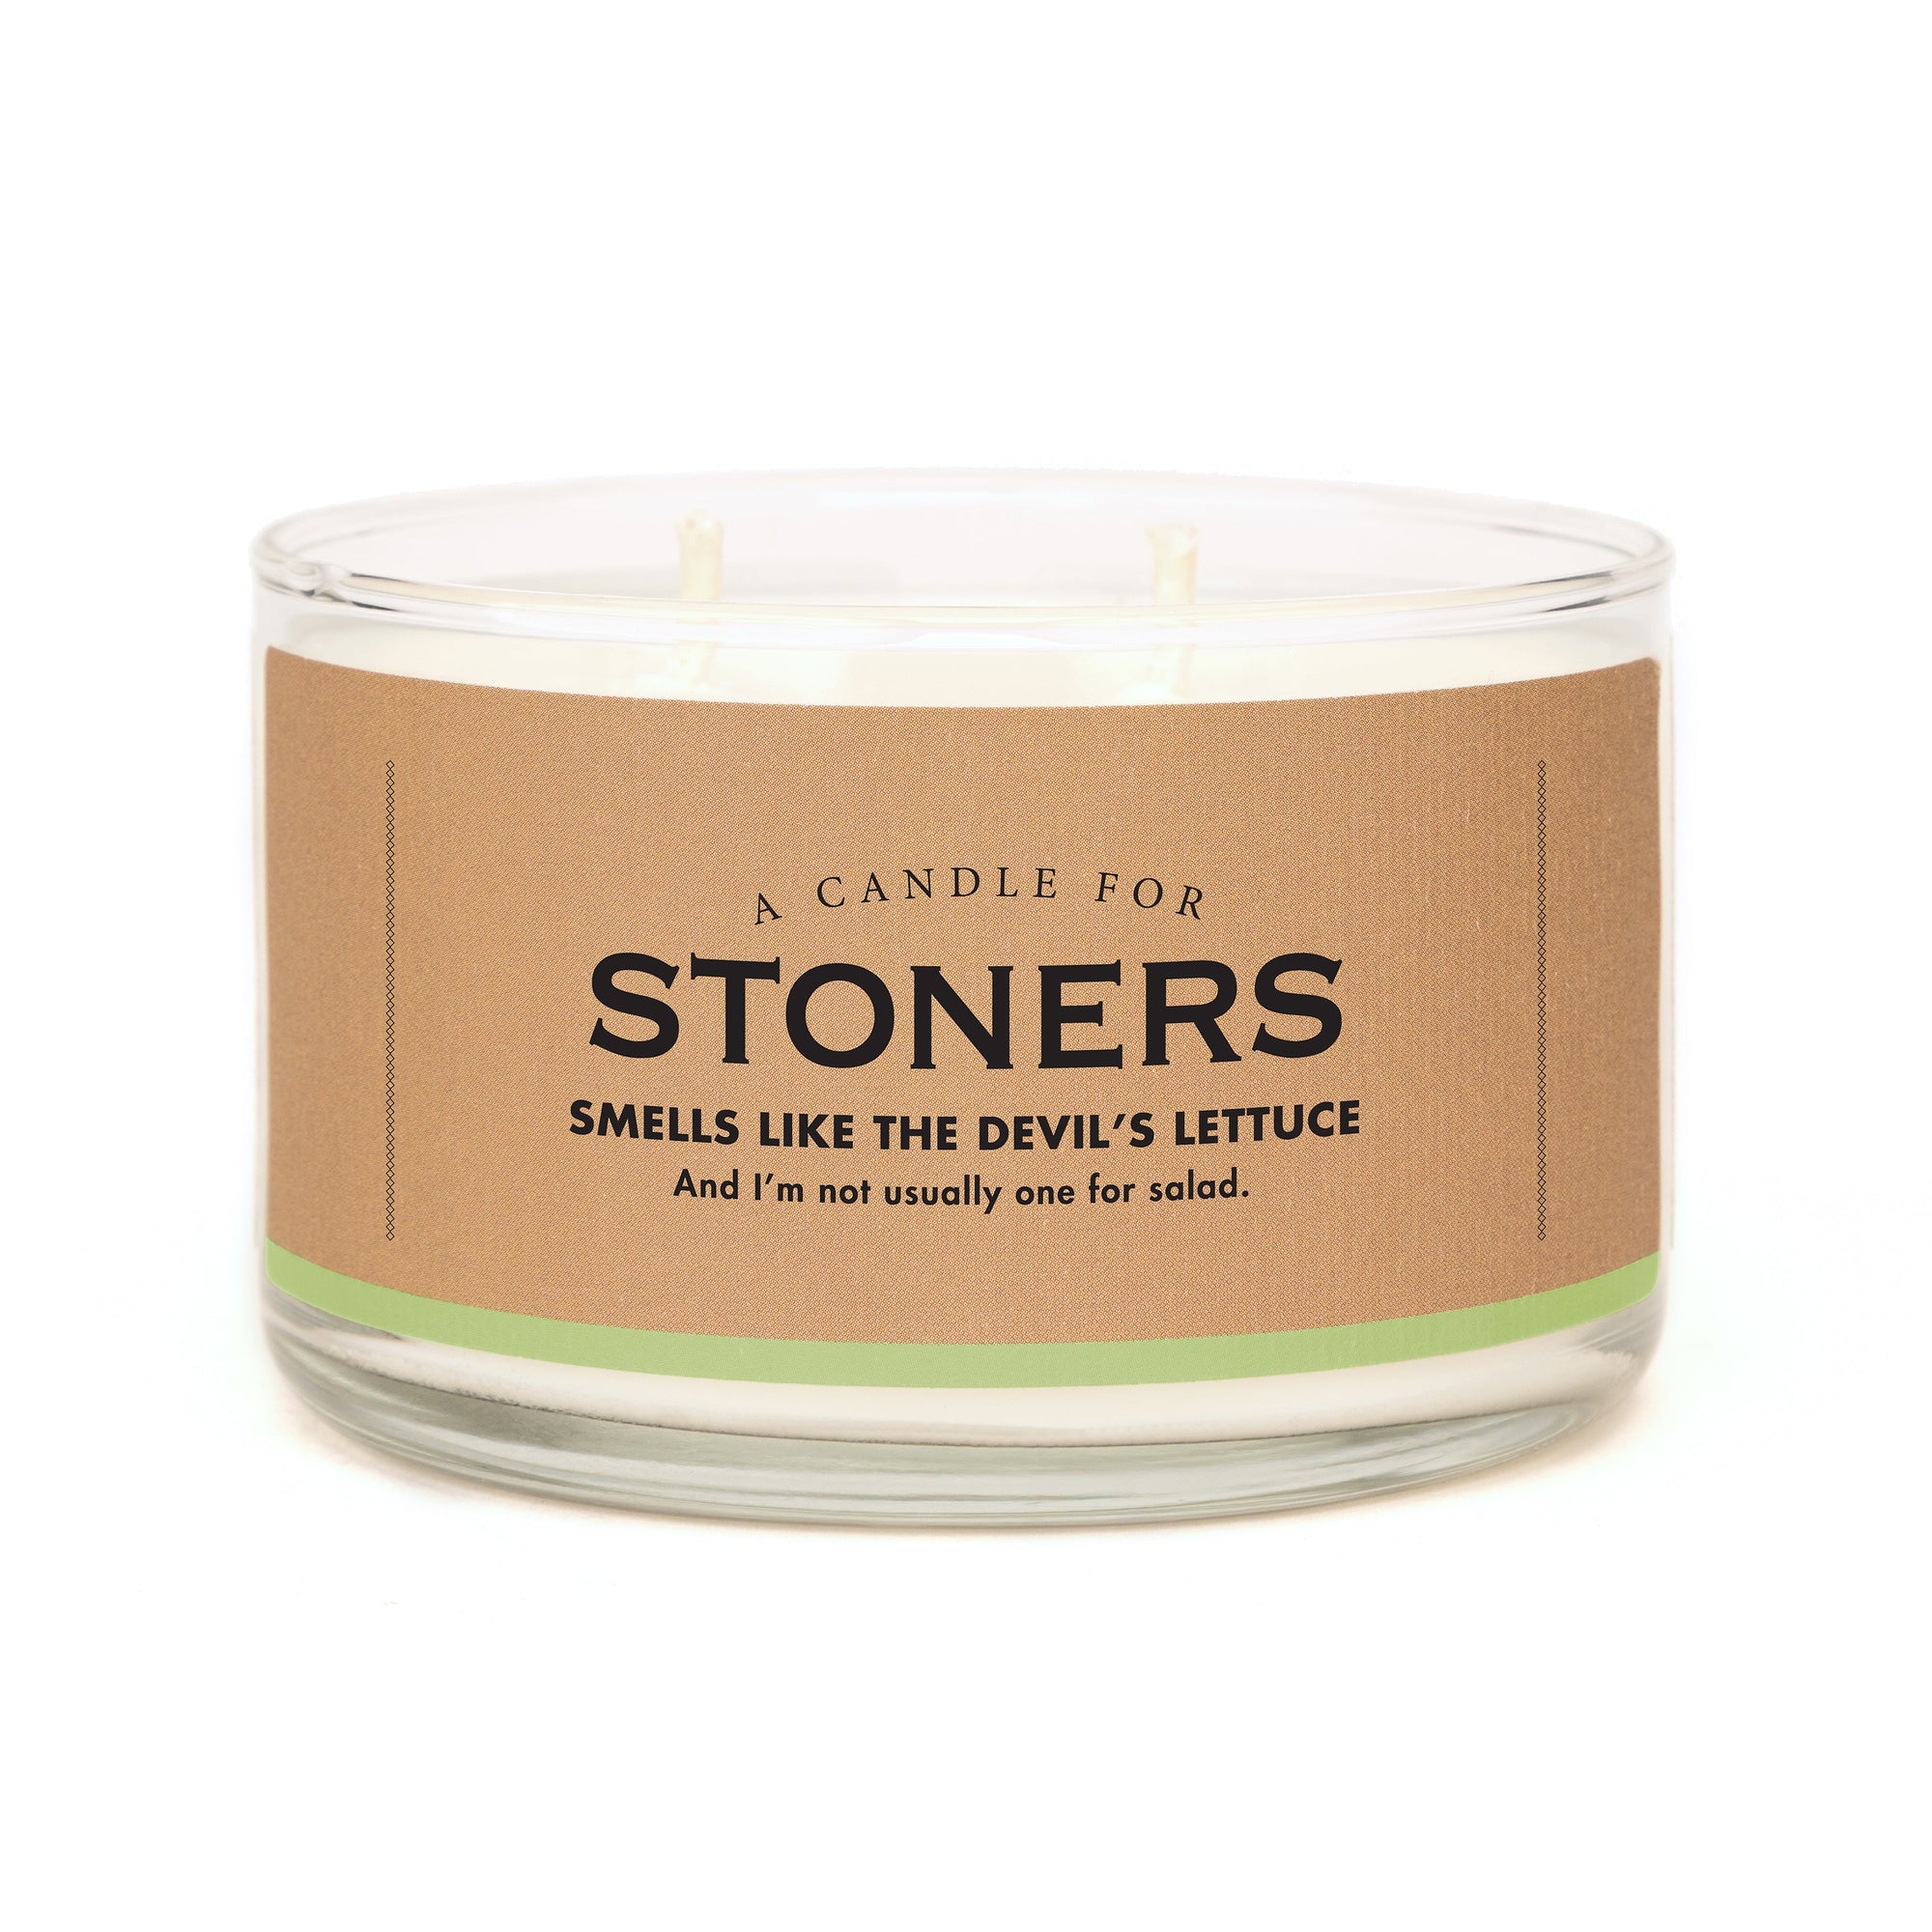 A Candle For Stoners